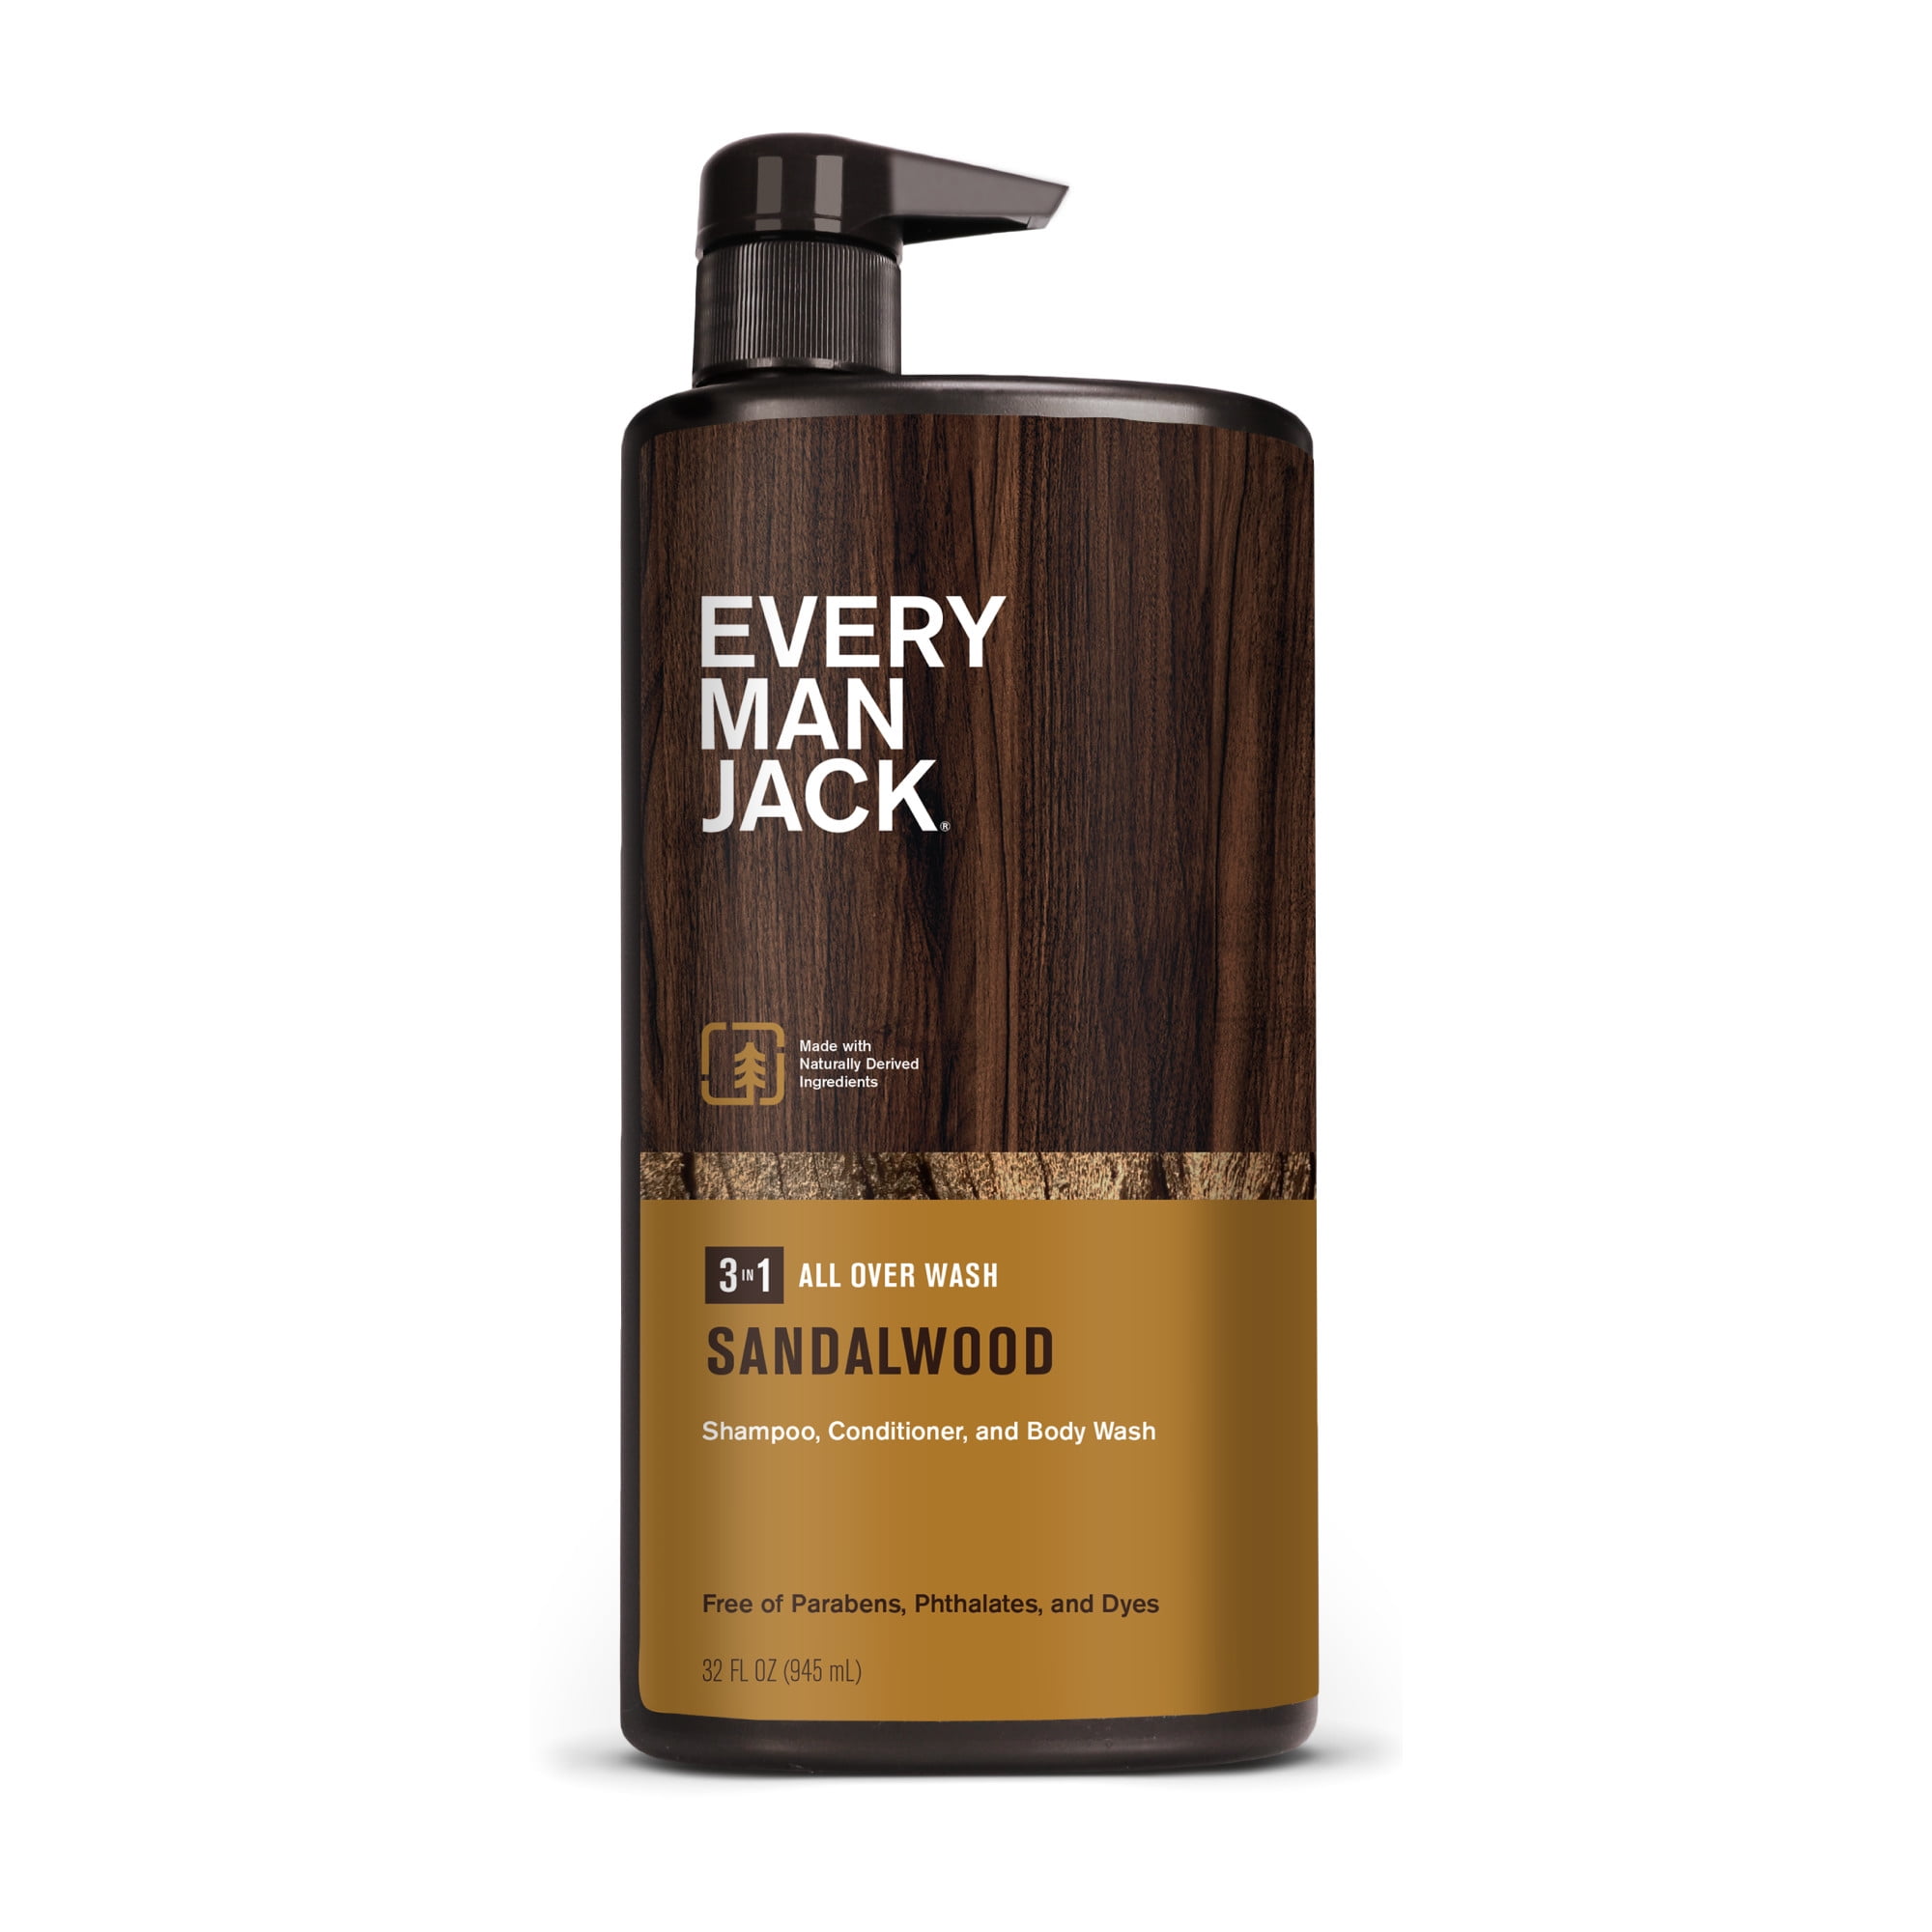 Every Man Jack Hydrating Sea Salt 3-in-1 All Over Wash for Naturally Derived, 32 oz - Walmart.com